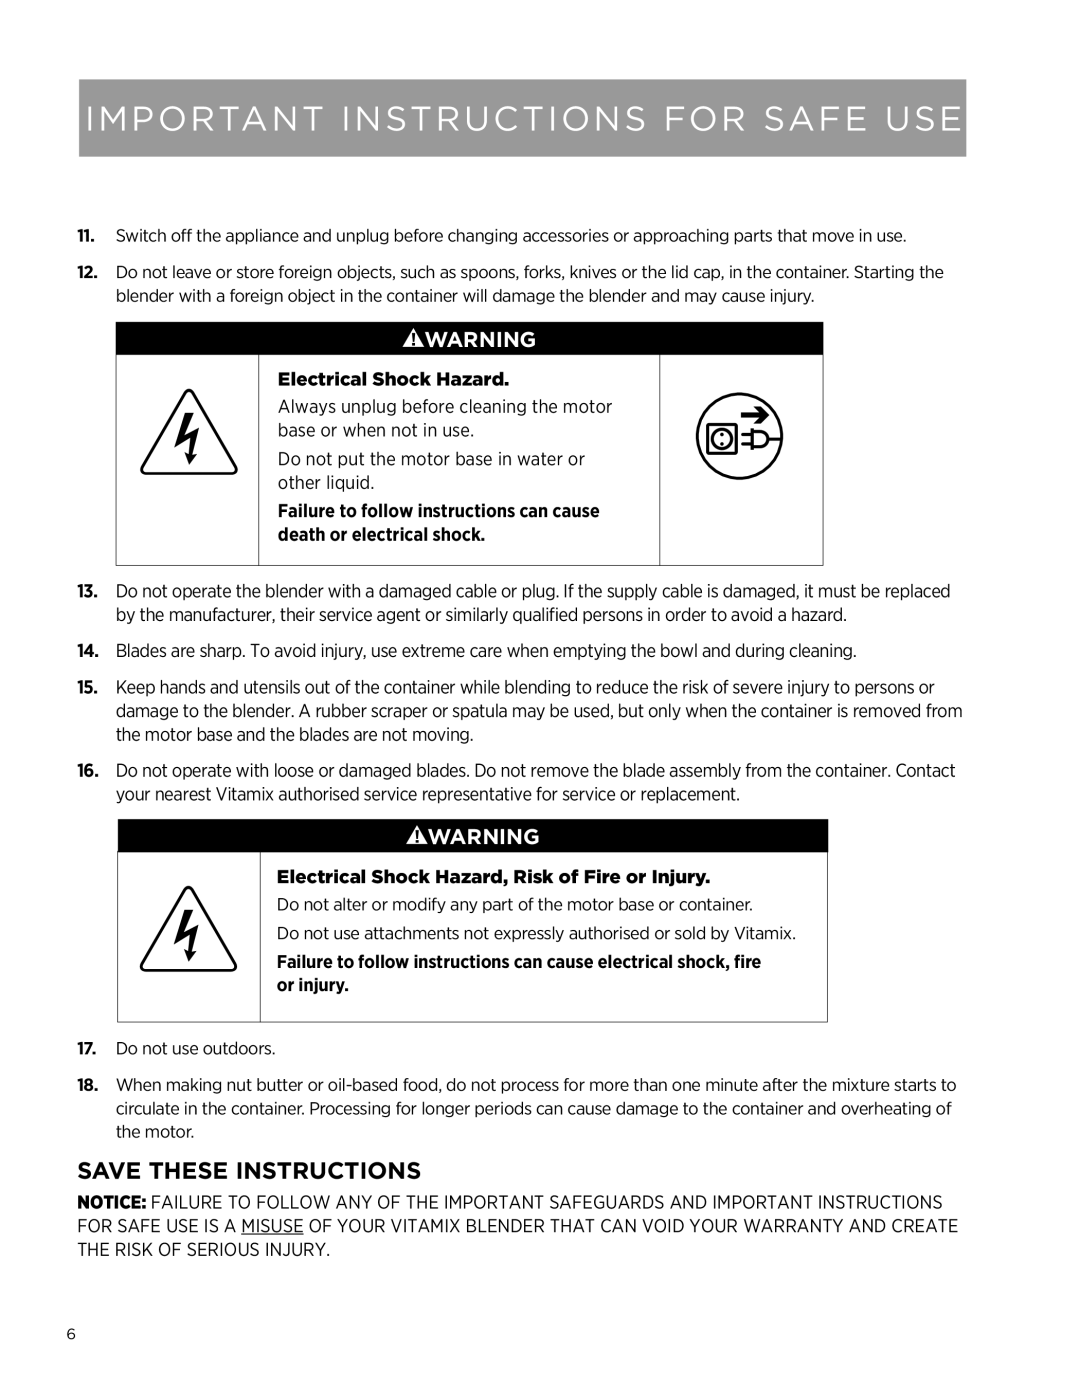 Vita-Mix Professional Series 500 Save These Instructions, Important Instructions For Safe Use, Electrical Shock Hazard 